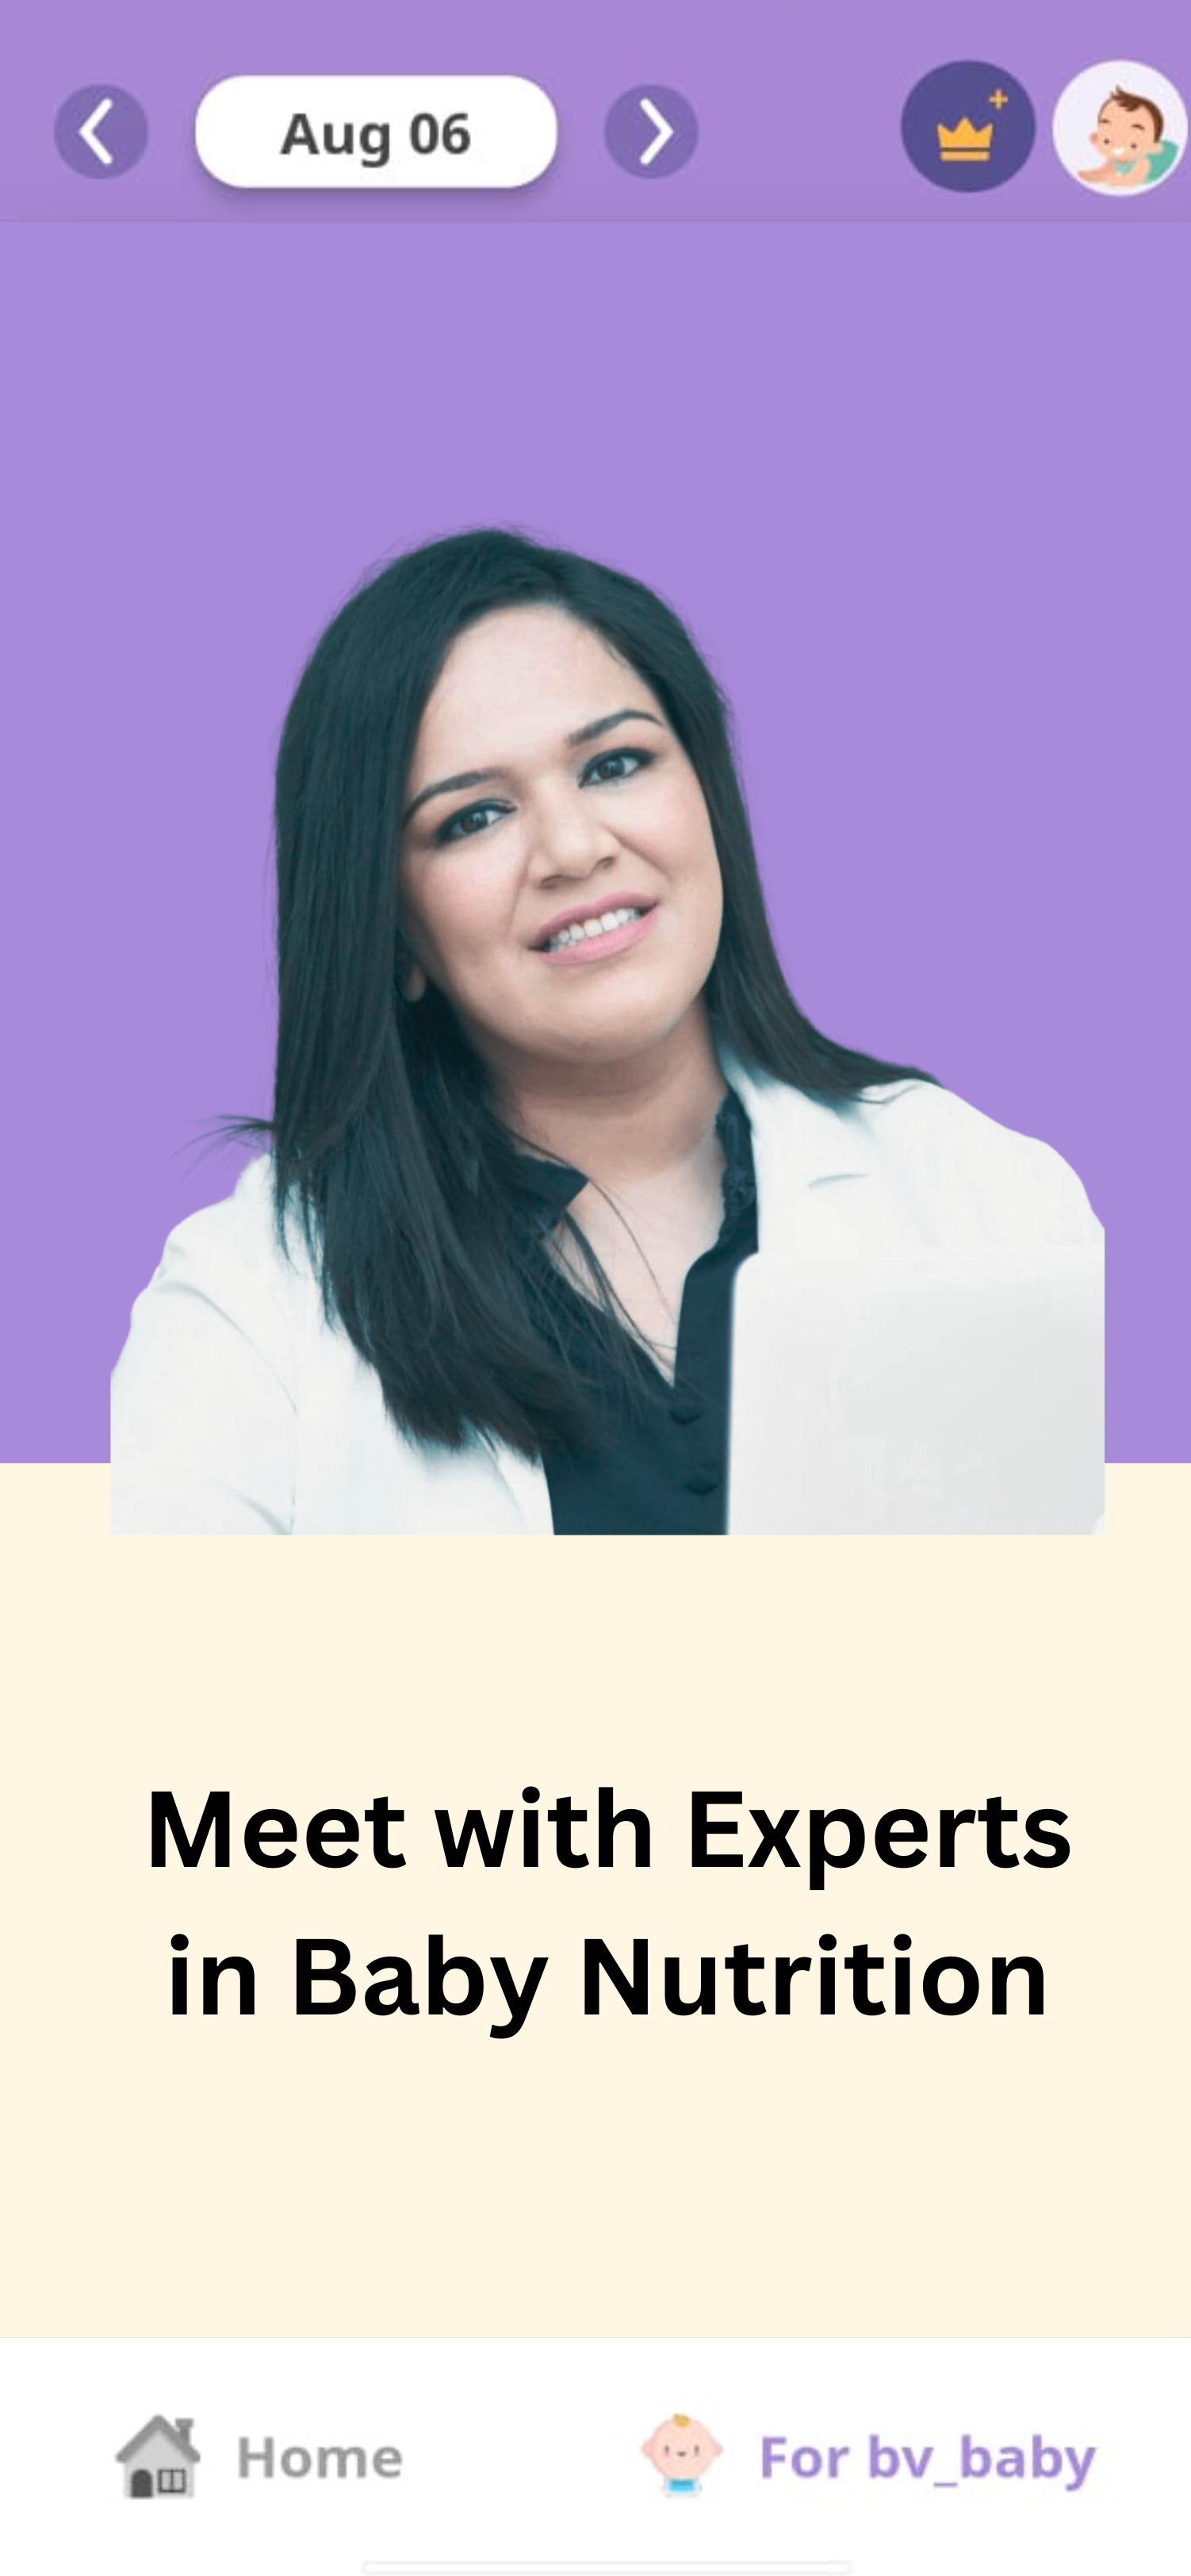 Meet with Experts